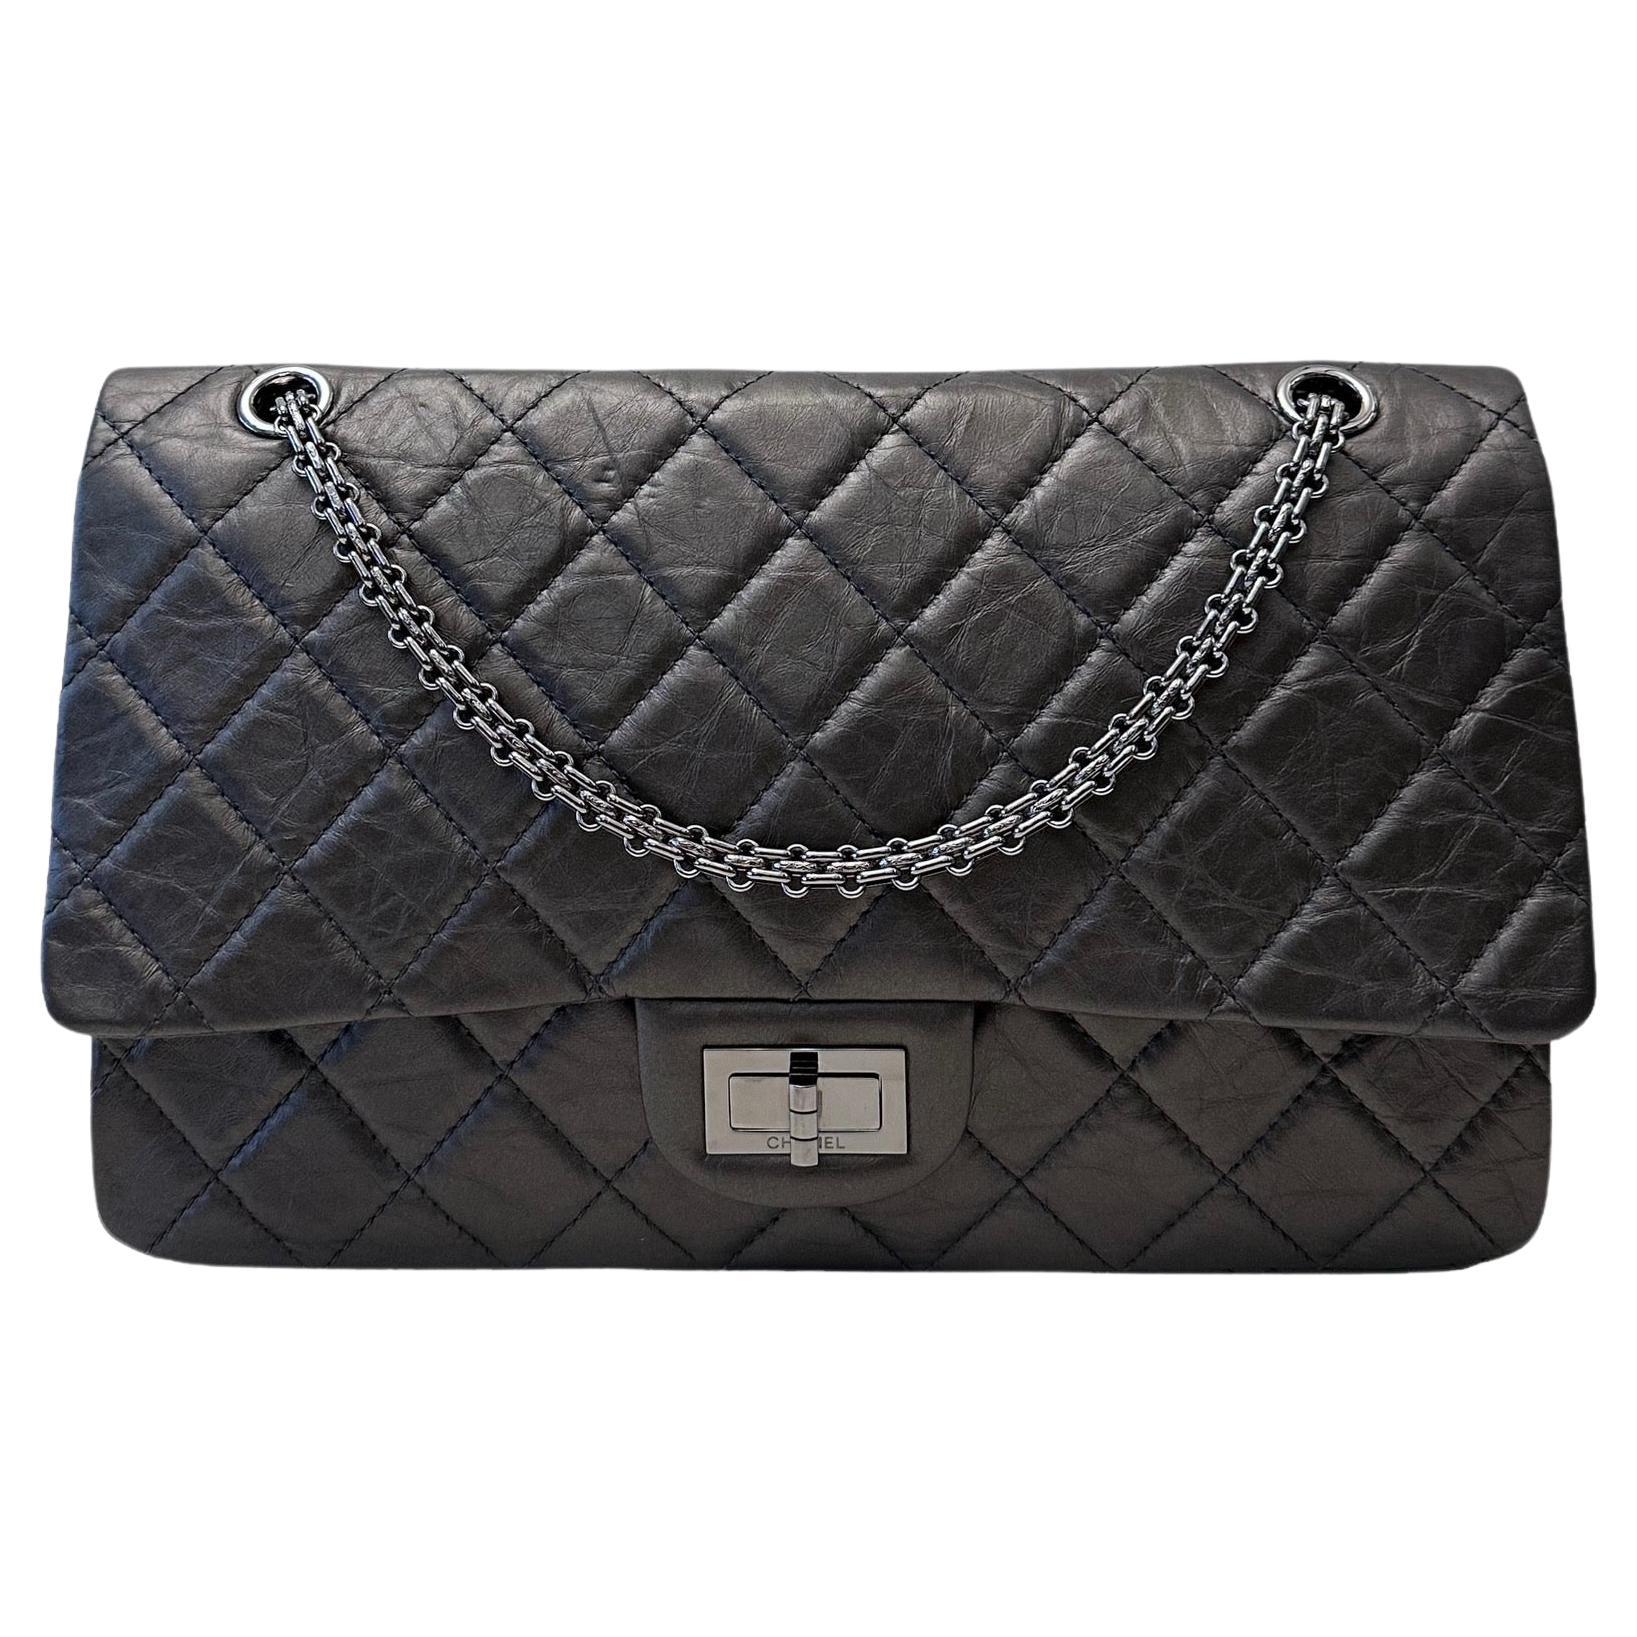 Chanel 2.55 Double Flap Grey Aged Calfskin Maxi Bag For Sale